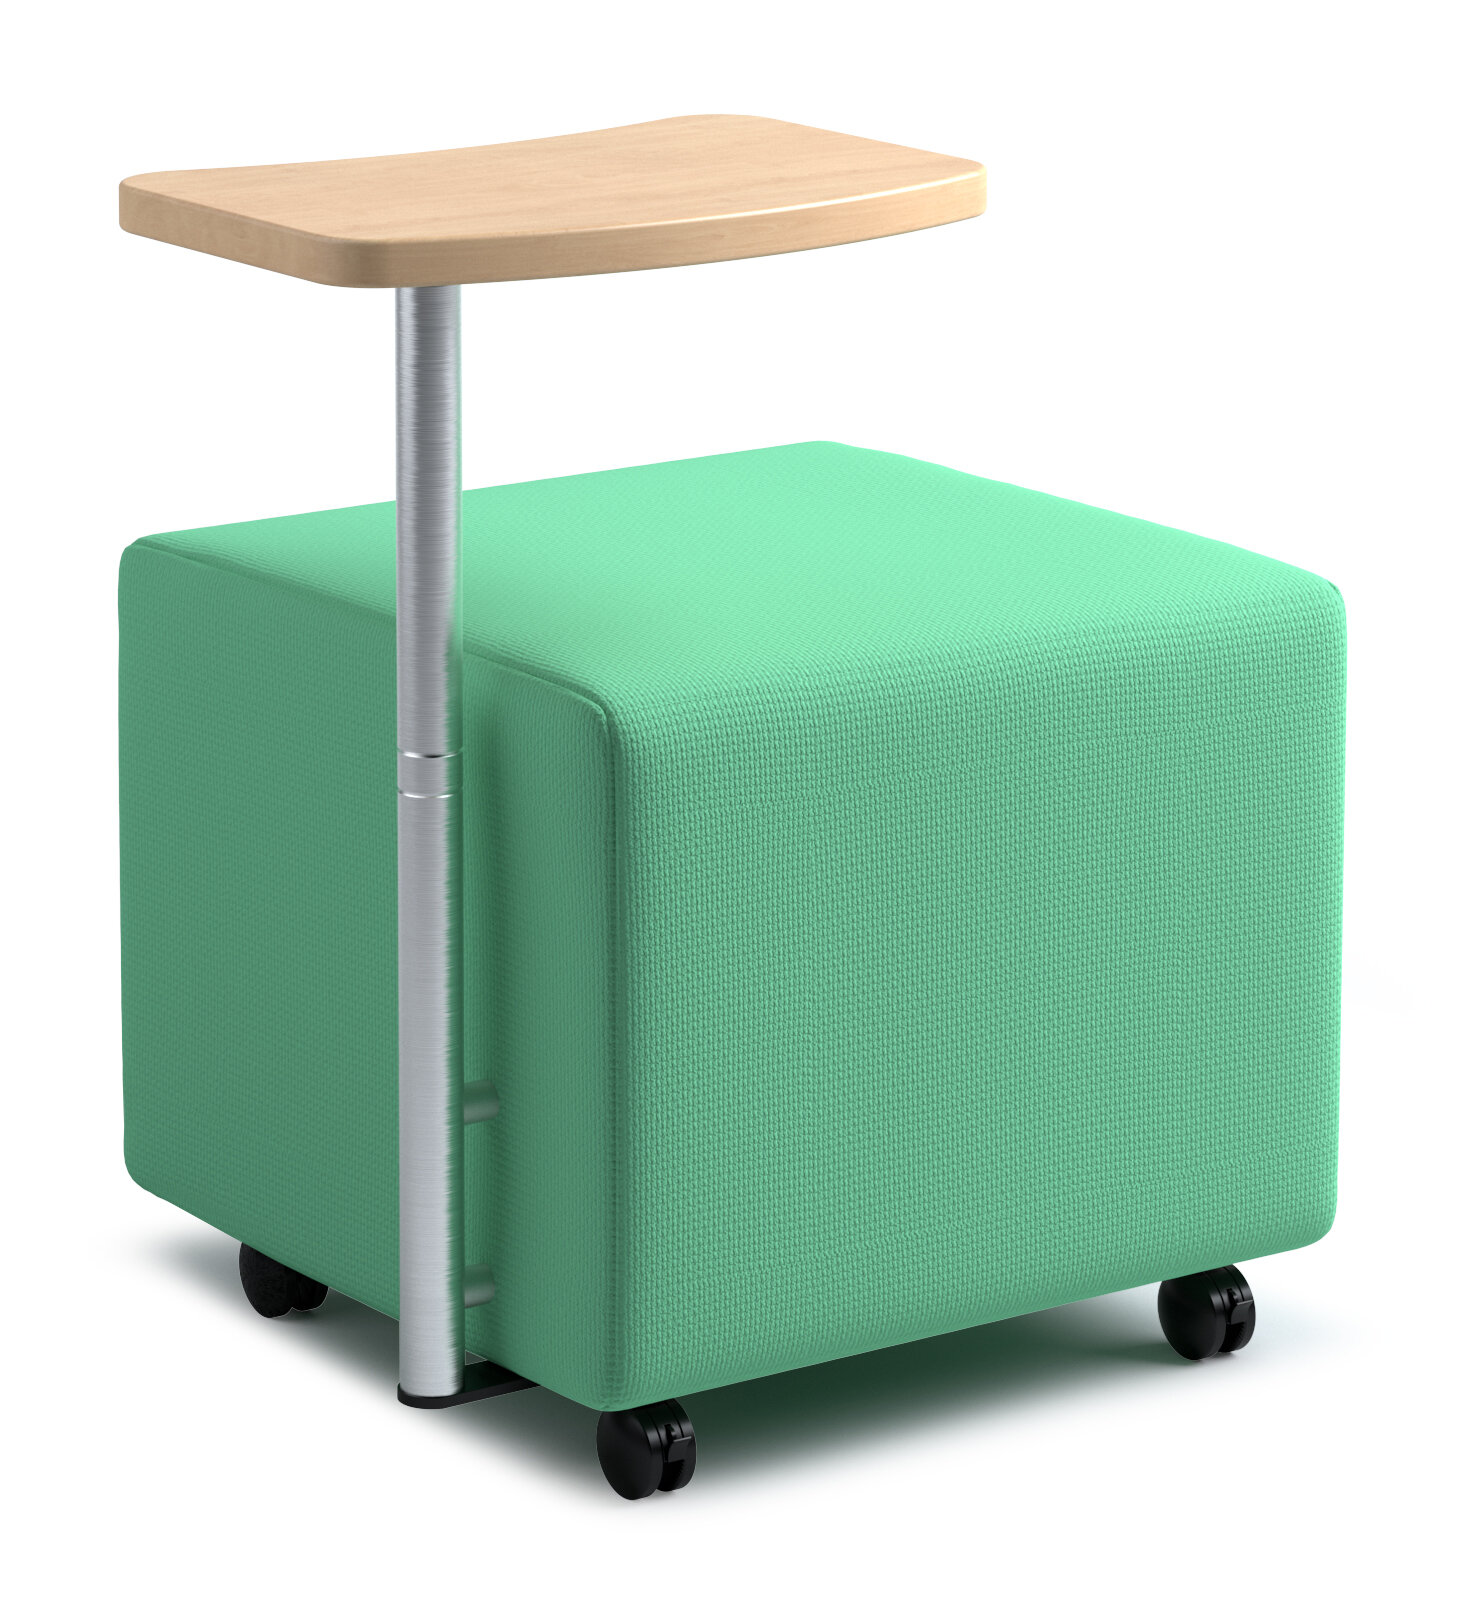 roam-seat-with-table-top.jpg